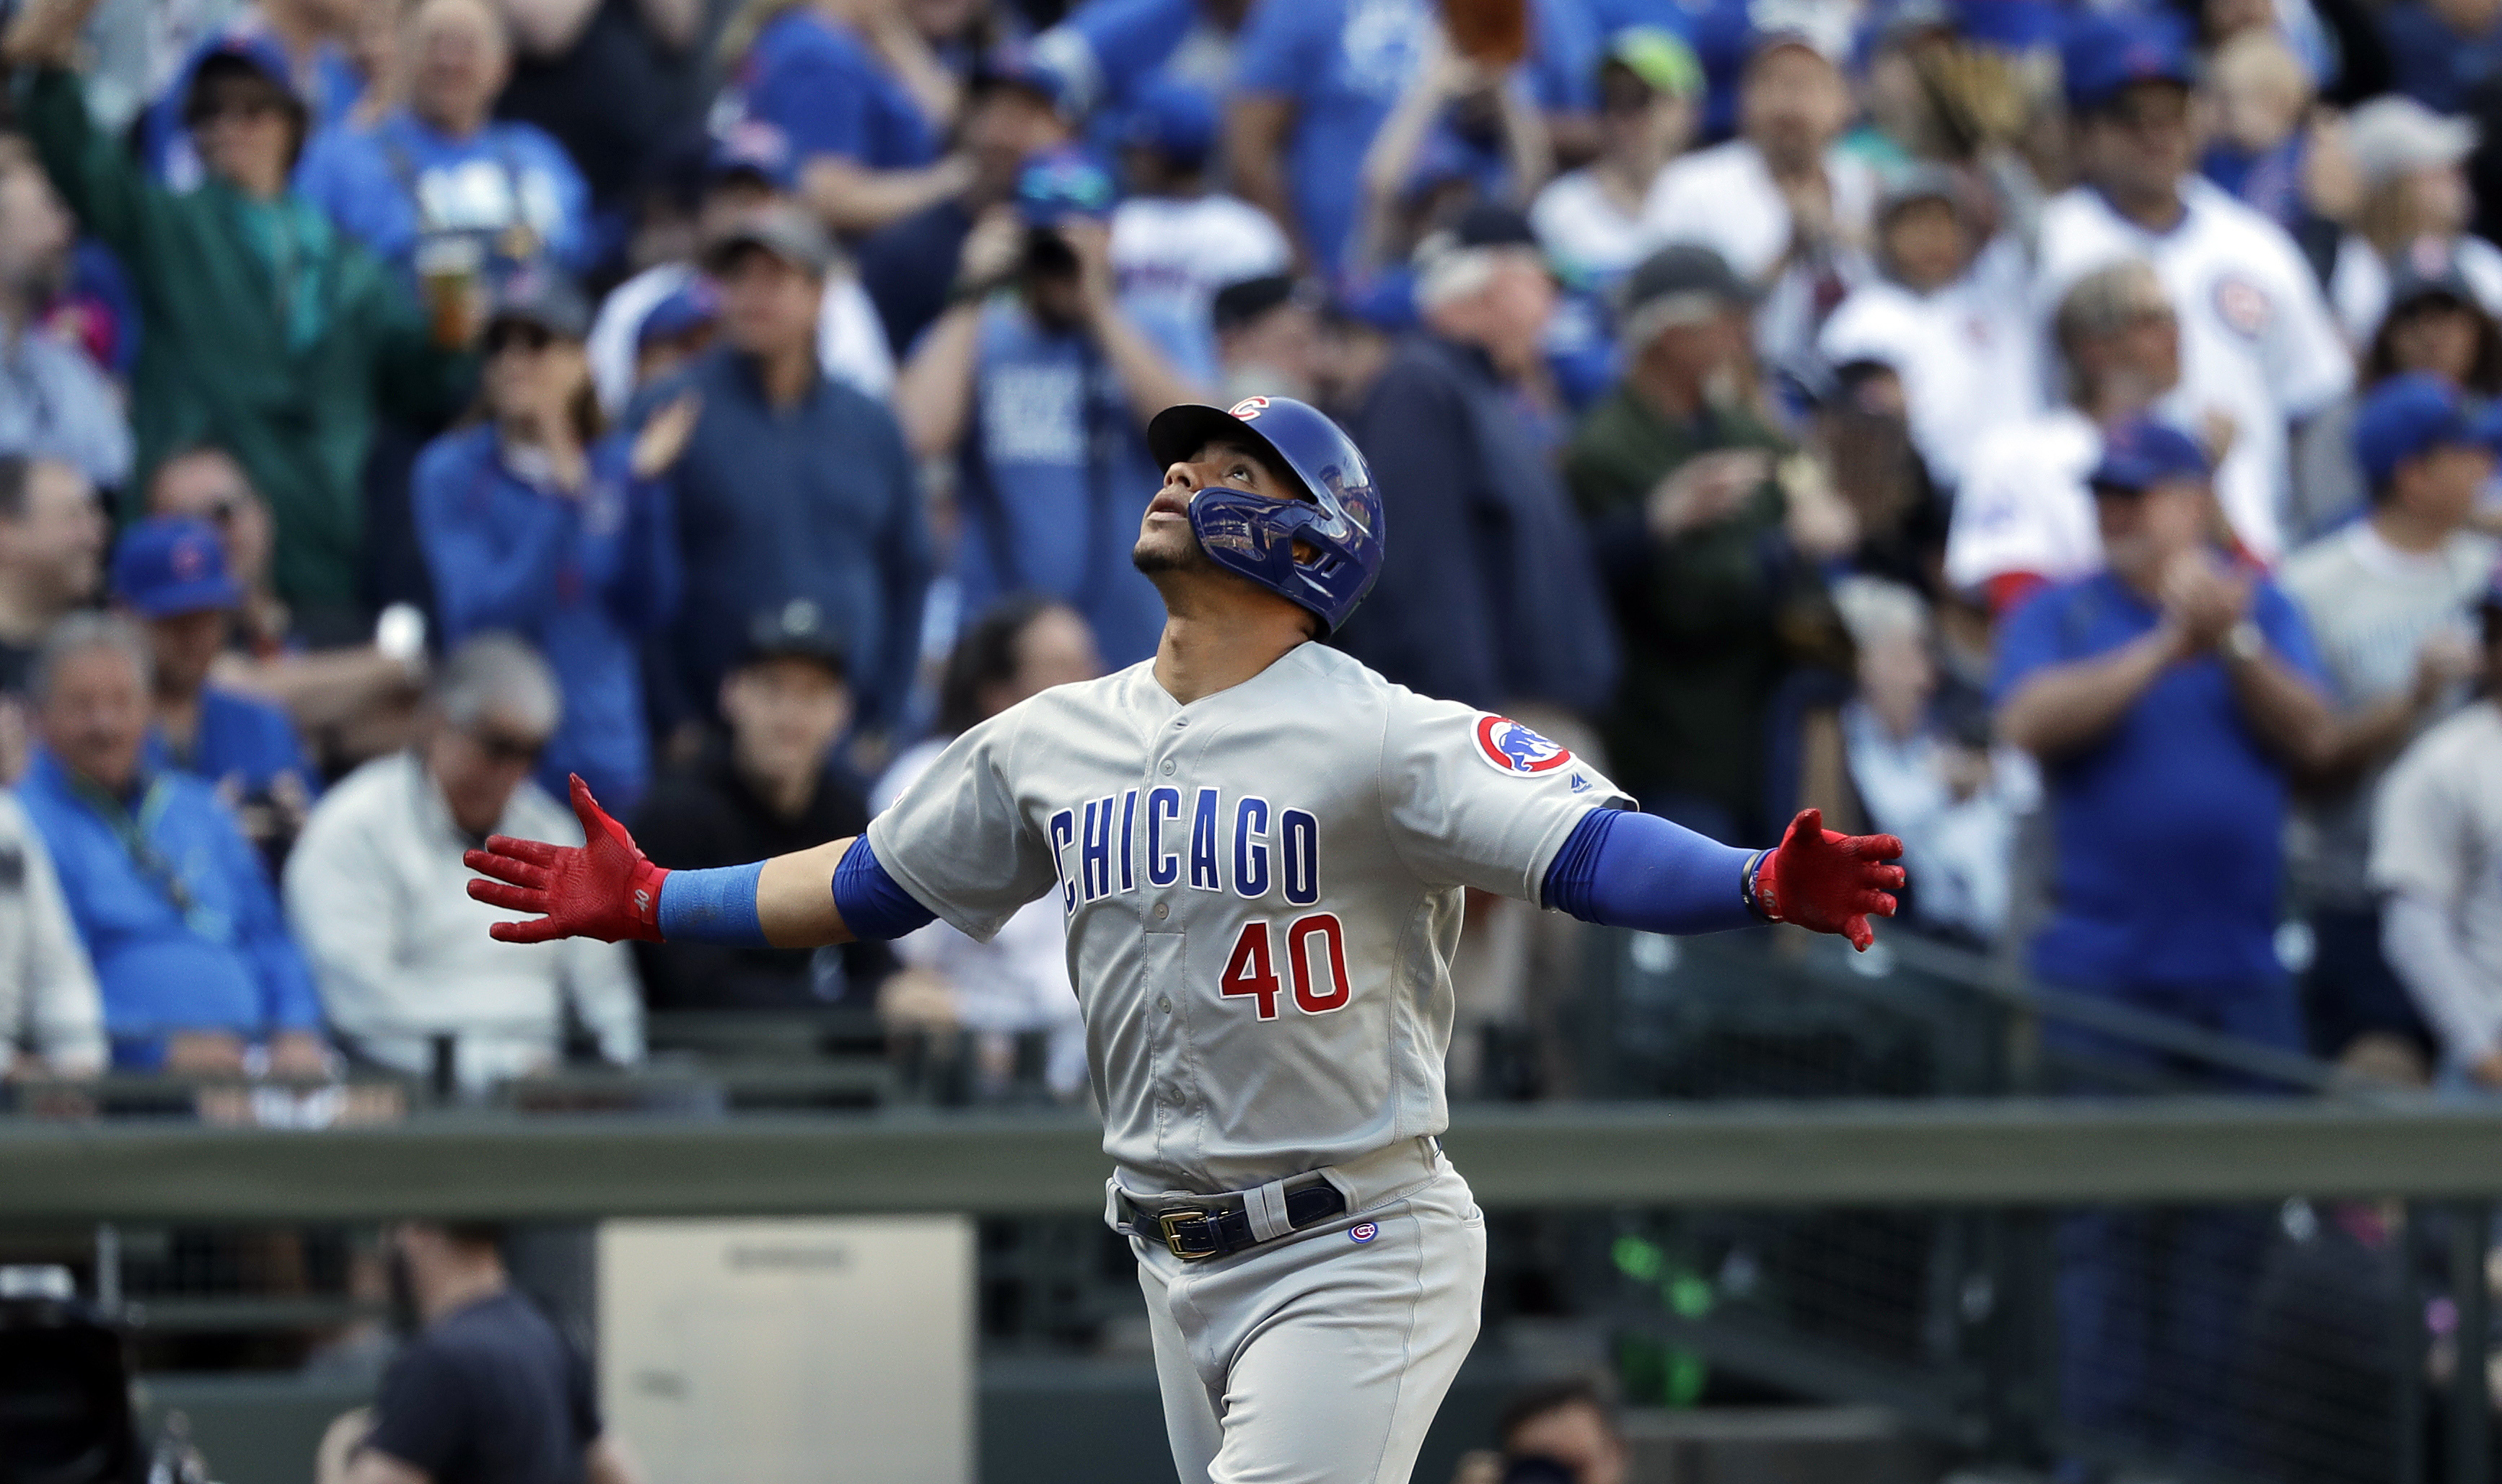 Cubs jump on Mariners, Lester allows 1 hit in 11-0 rout